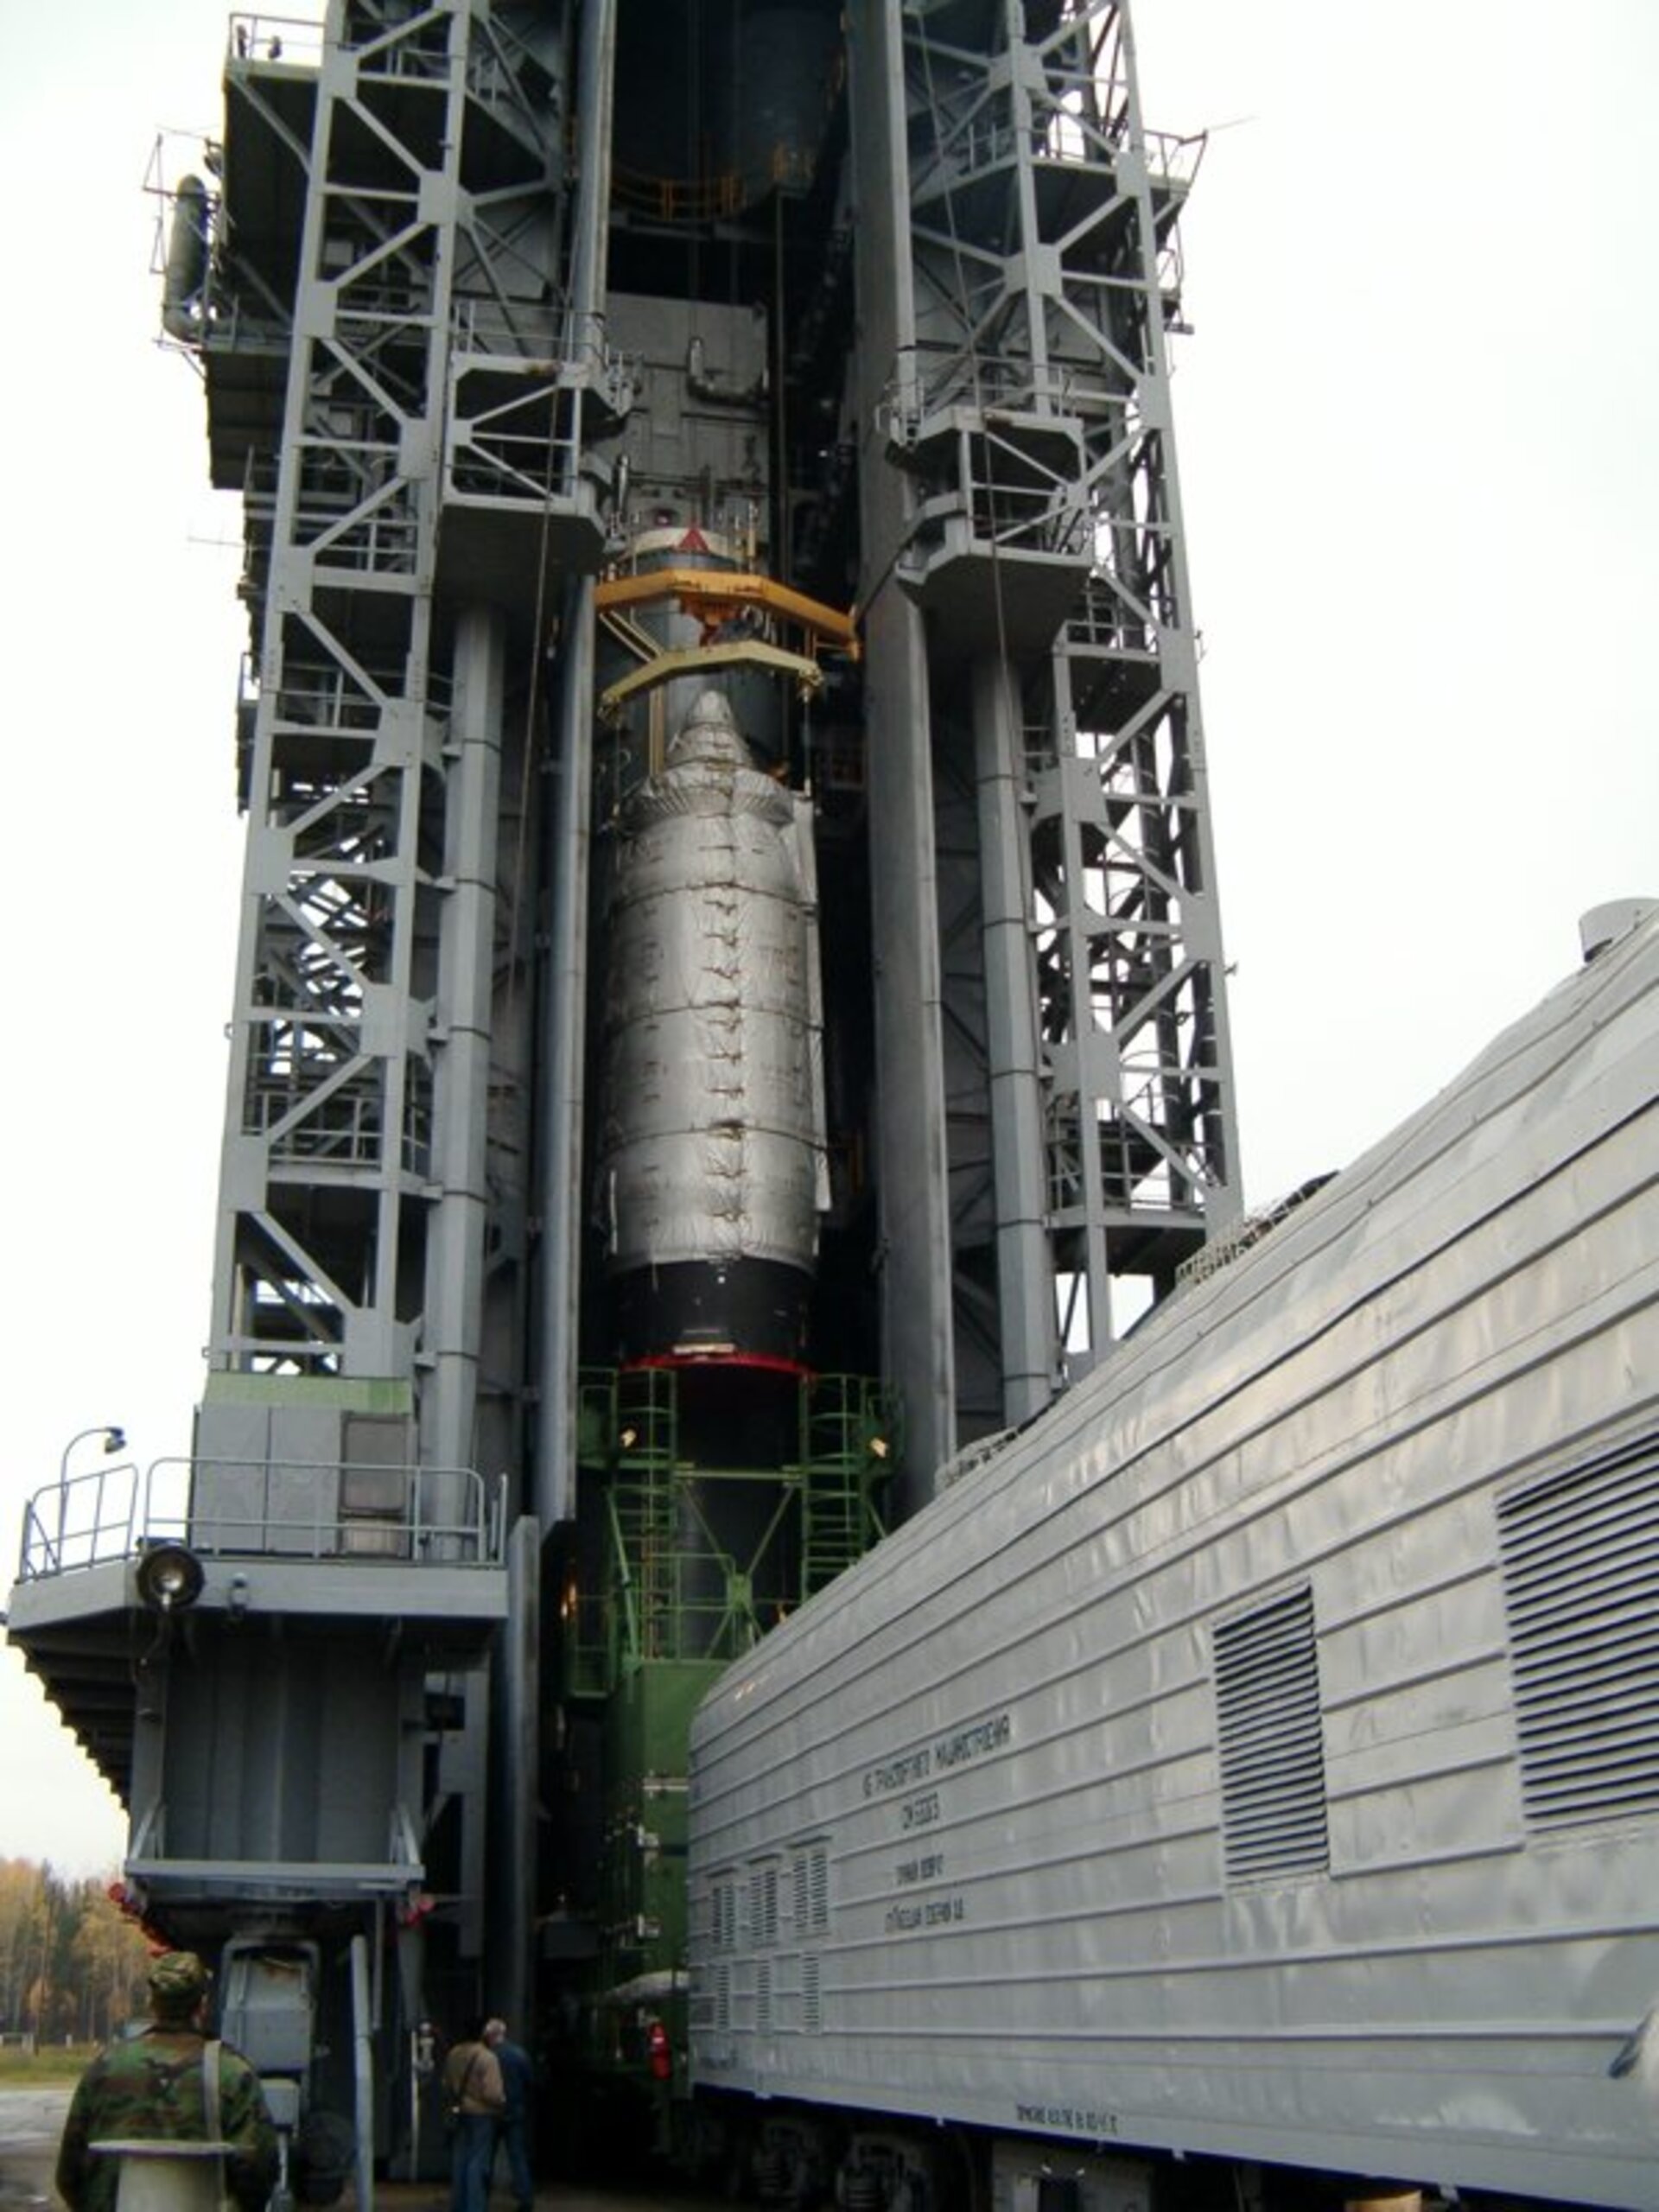 CryoSat's upper composite is lifted on top of the tower